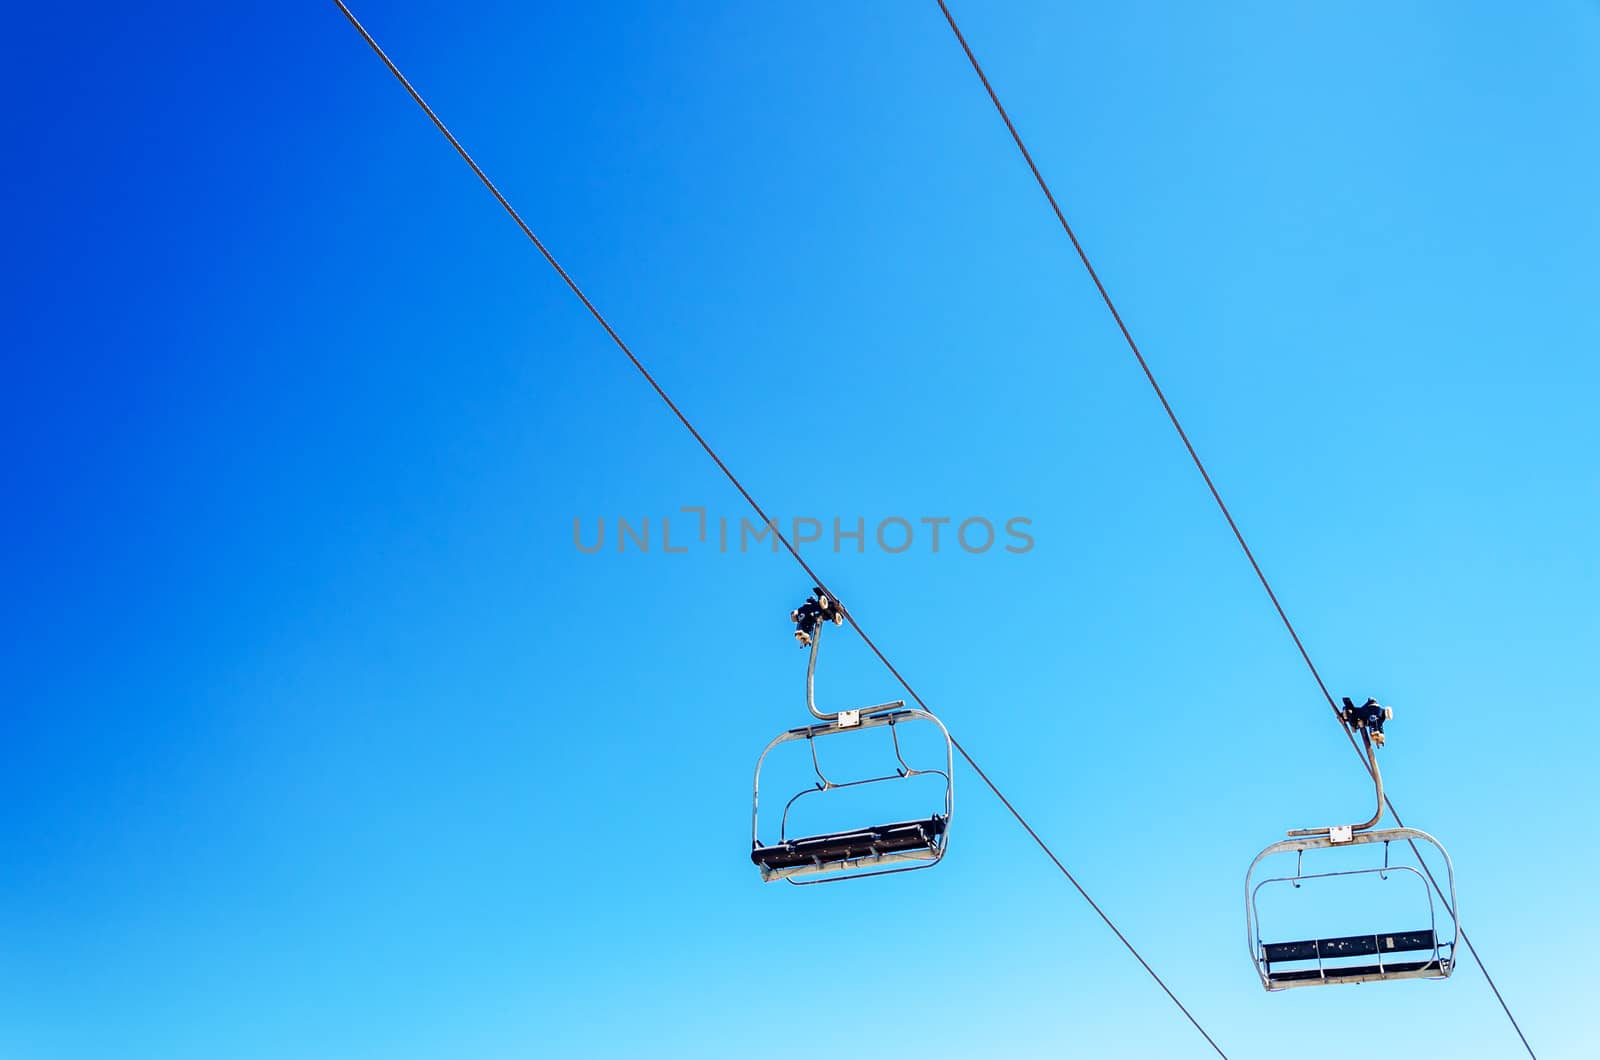 Chairlift and Sky by jkraft5